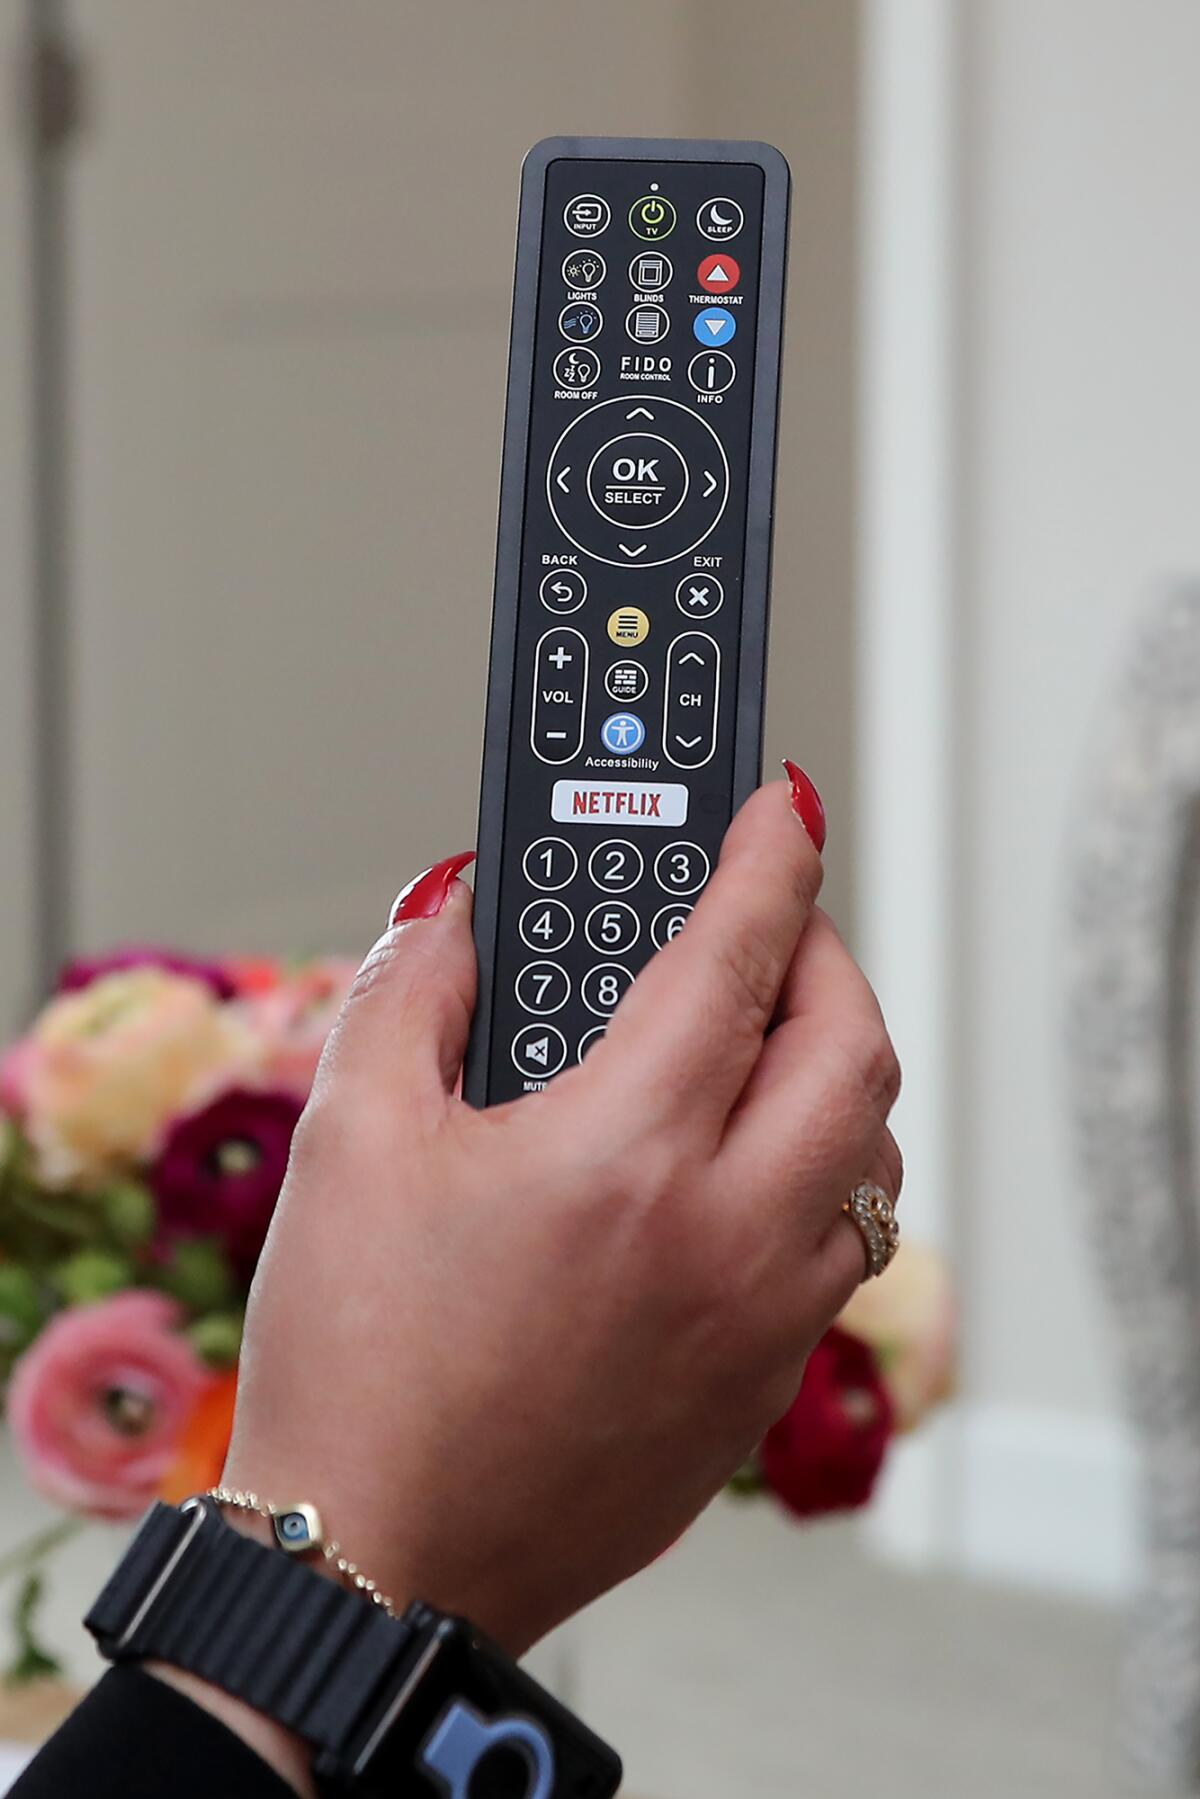 An Enseo remote controller allows access to televisions, window shades, lighting and room temperature.